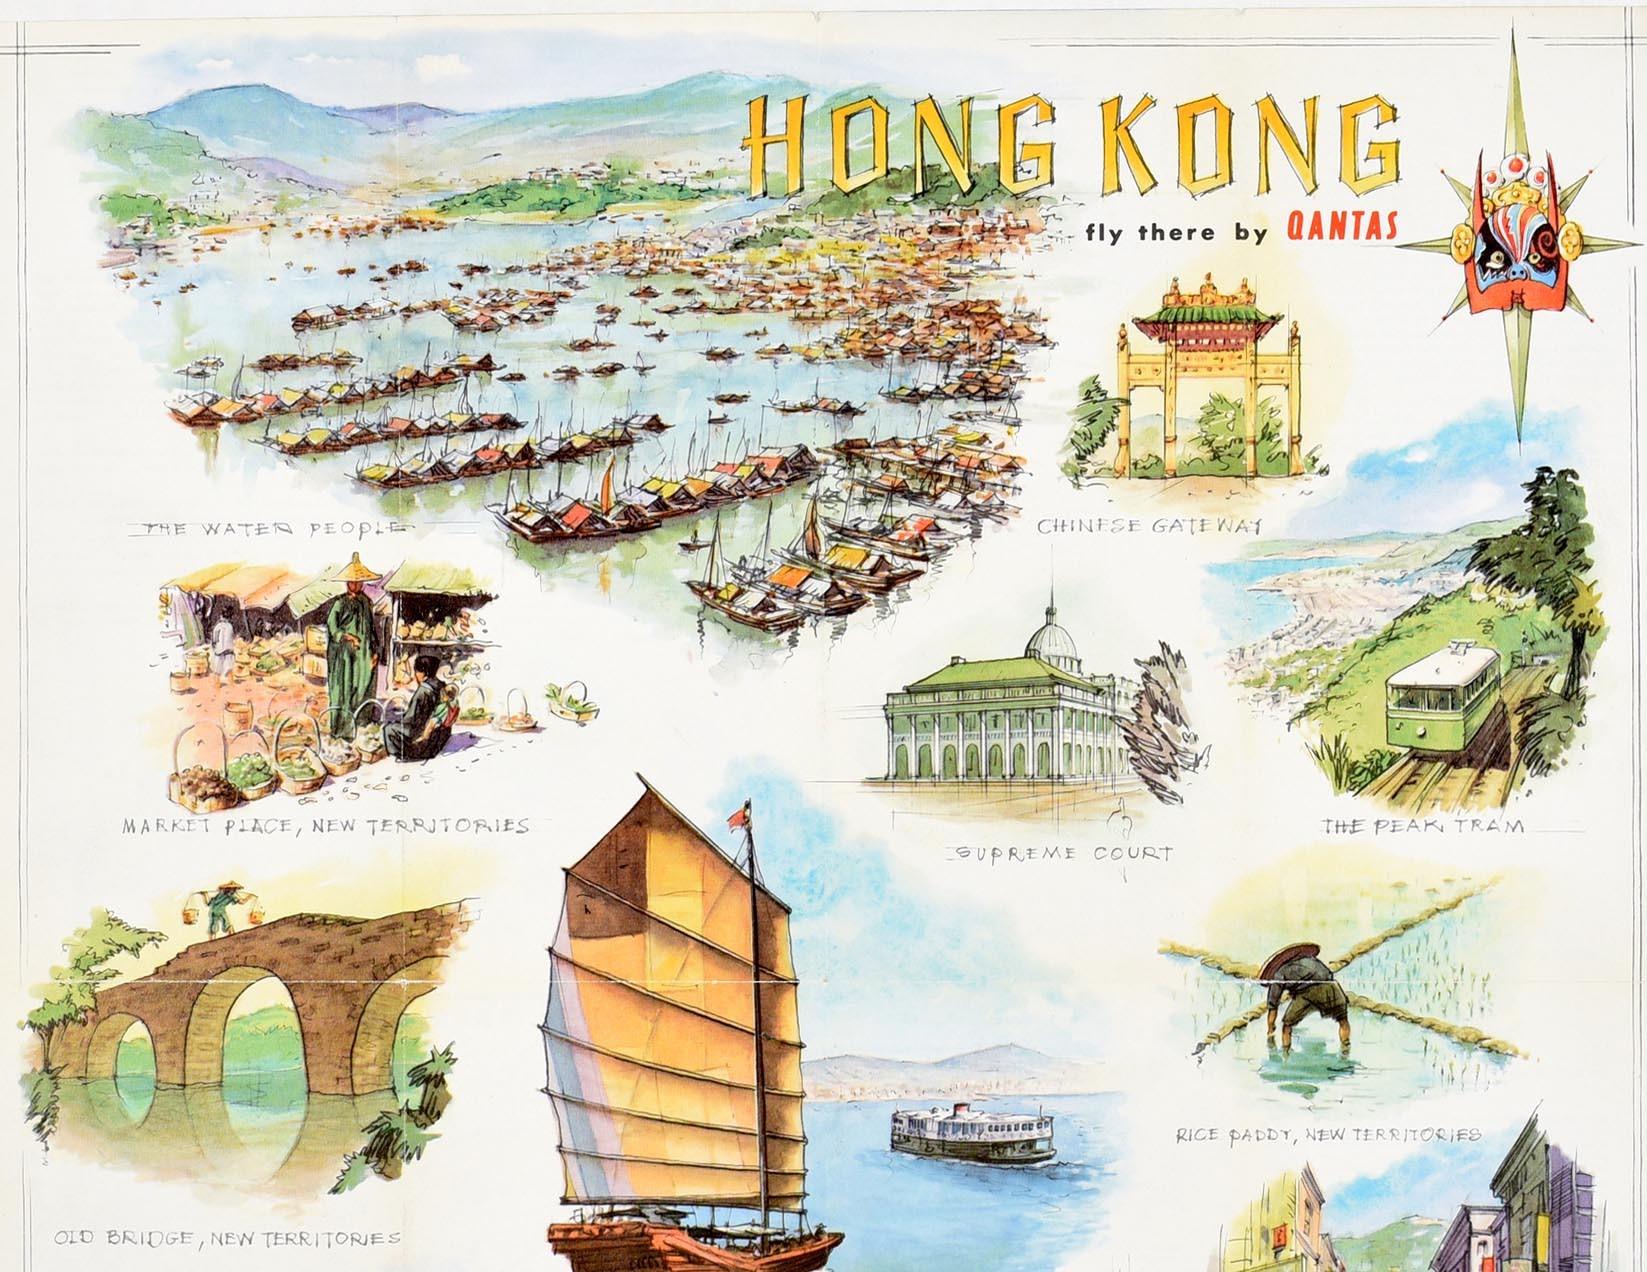 Original vintage travel poster for Hong Kong fly there by Qantas featuring colourful illustrations of Hong Kong scenery including boats on the sea with the hills on the horizon entitled The Water People, the Peak Tram and Central business district,